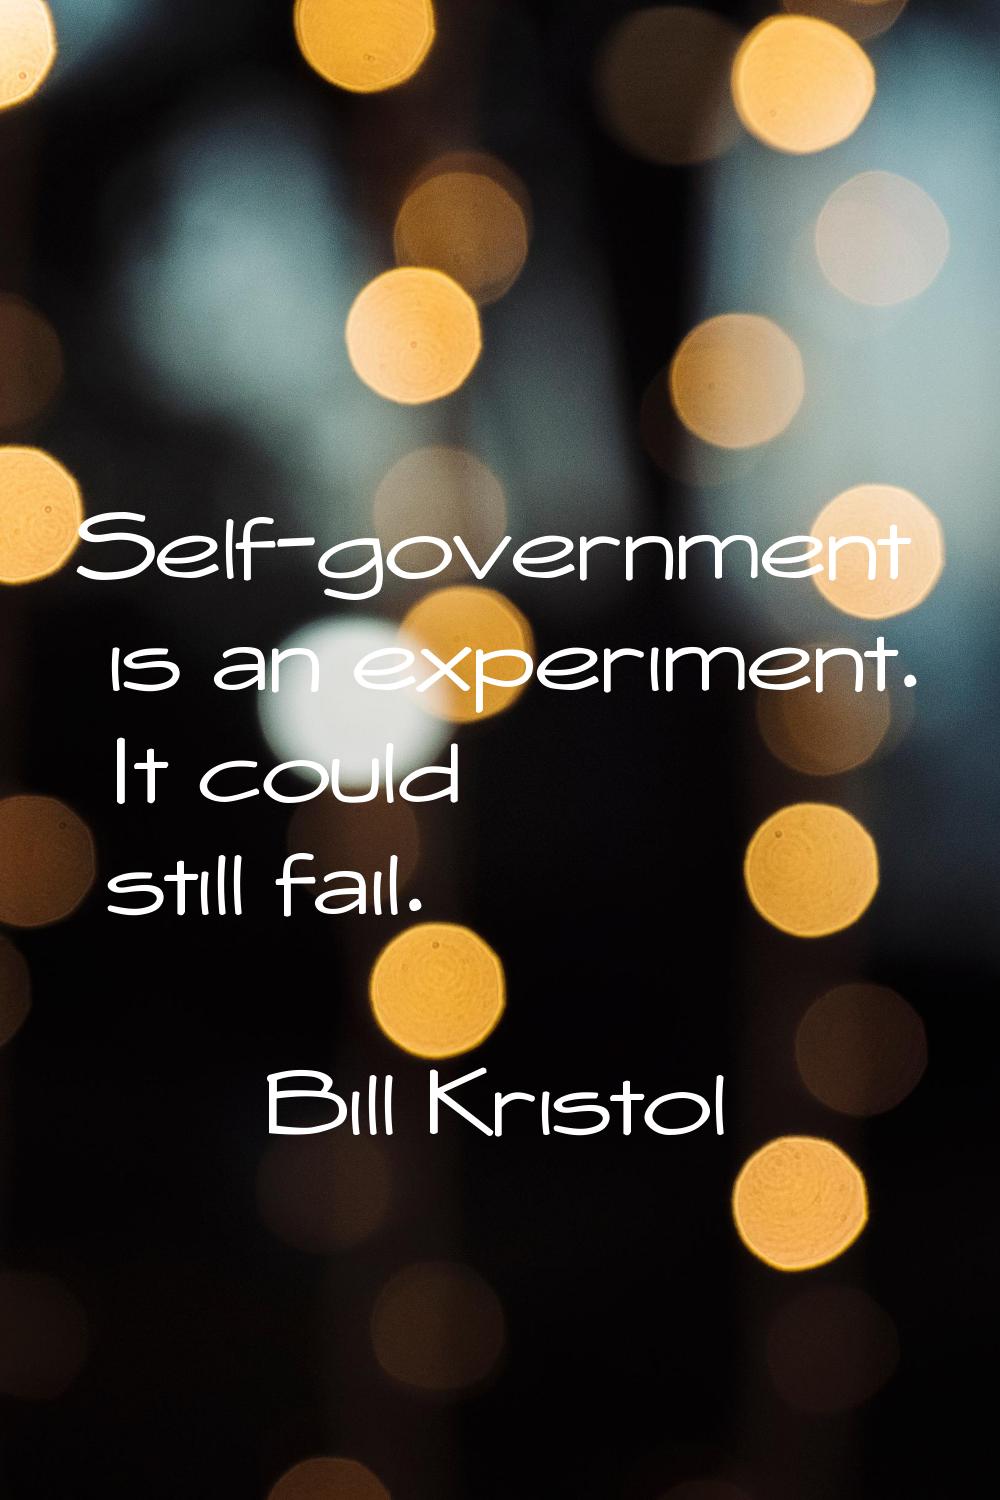 Self-government is an experiment. It could still fail.